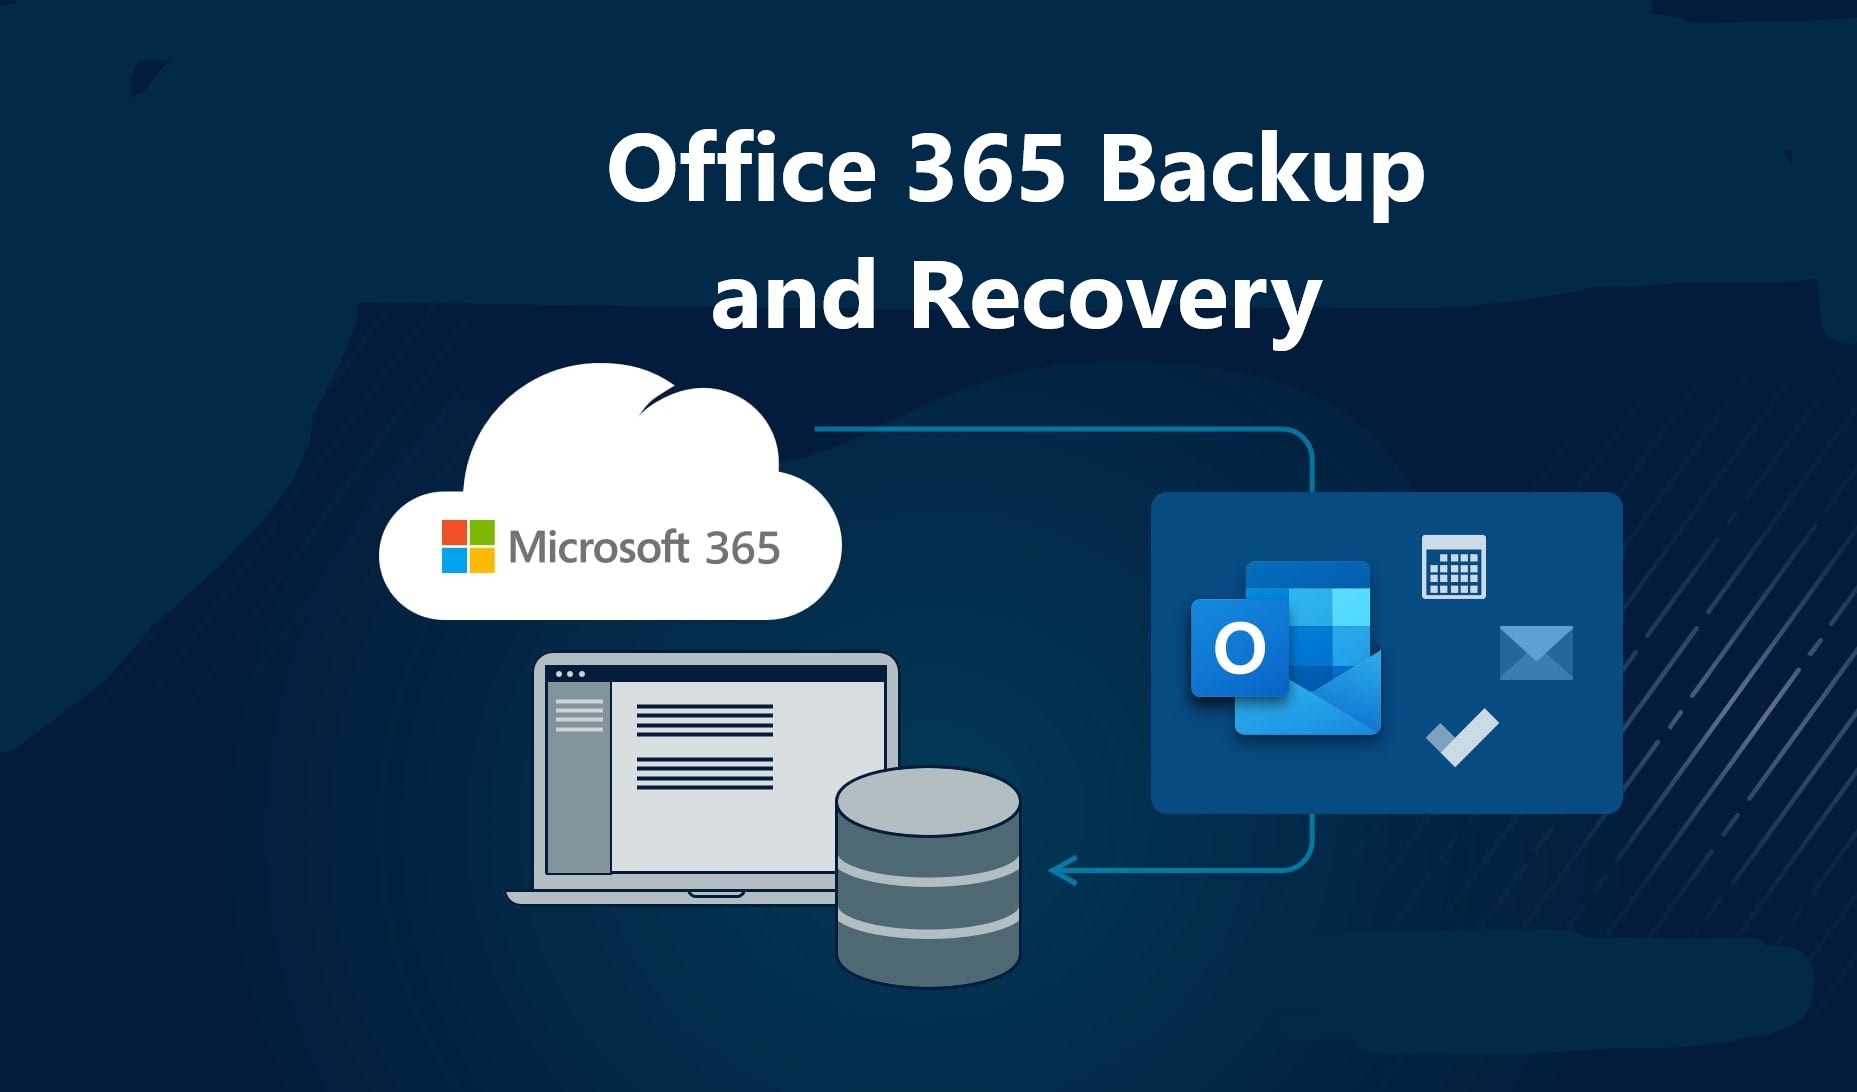 Office 365 Backup and recovery